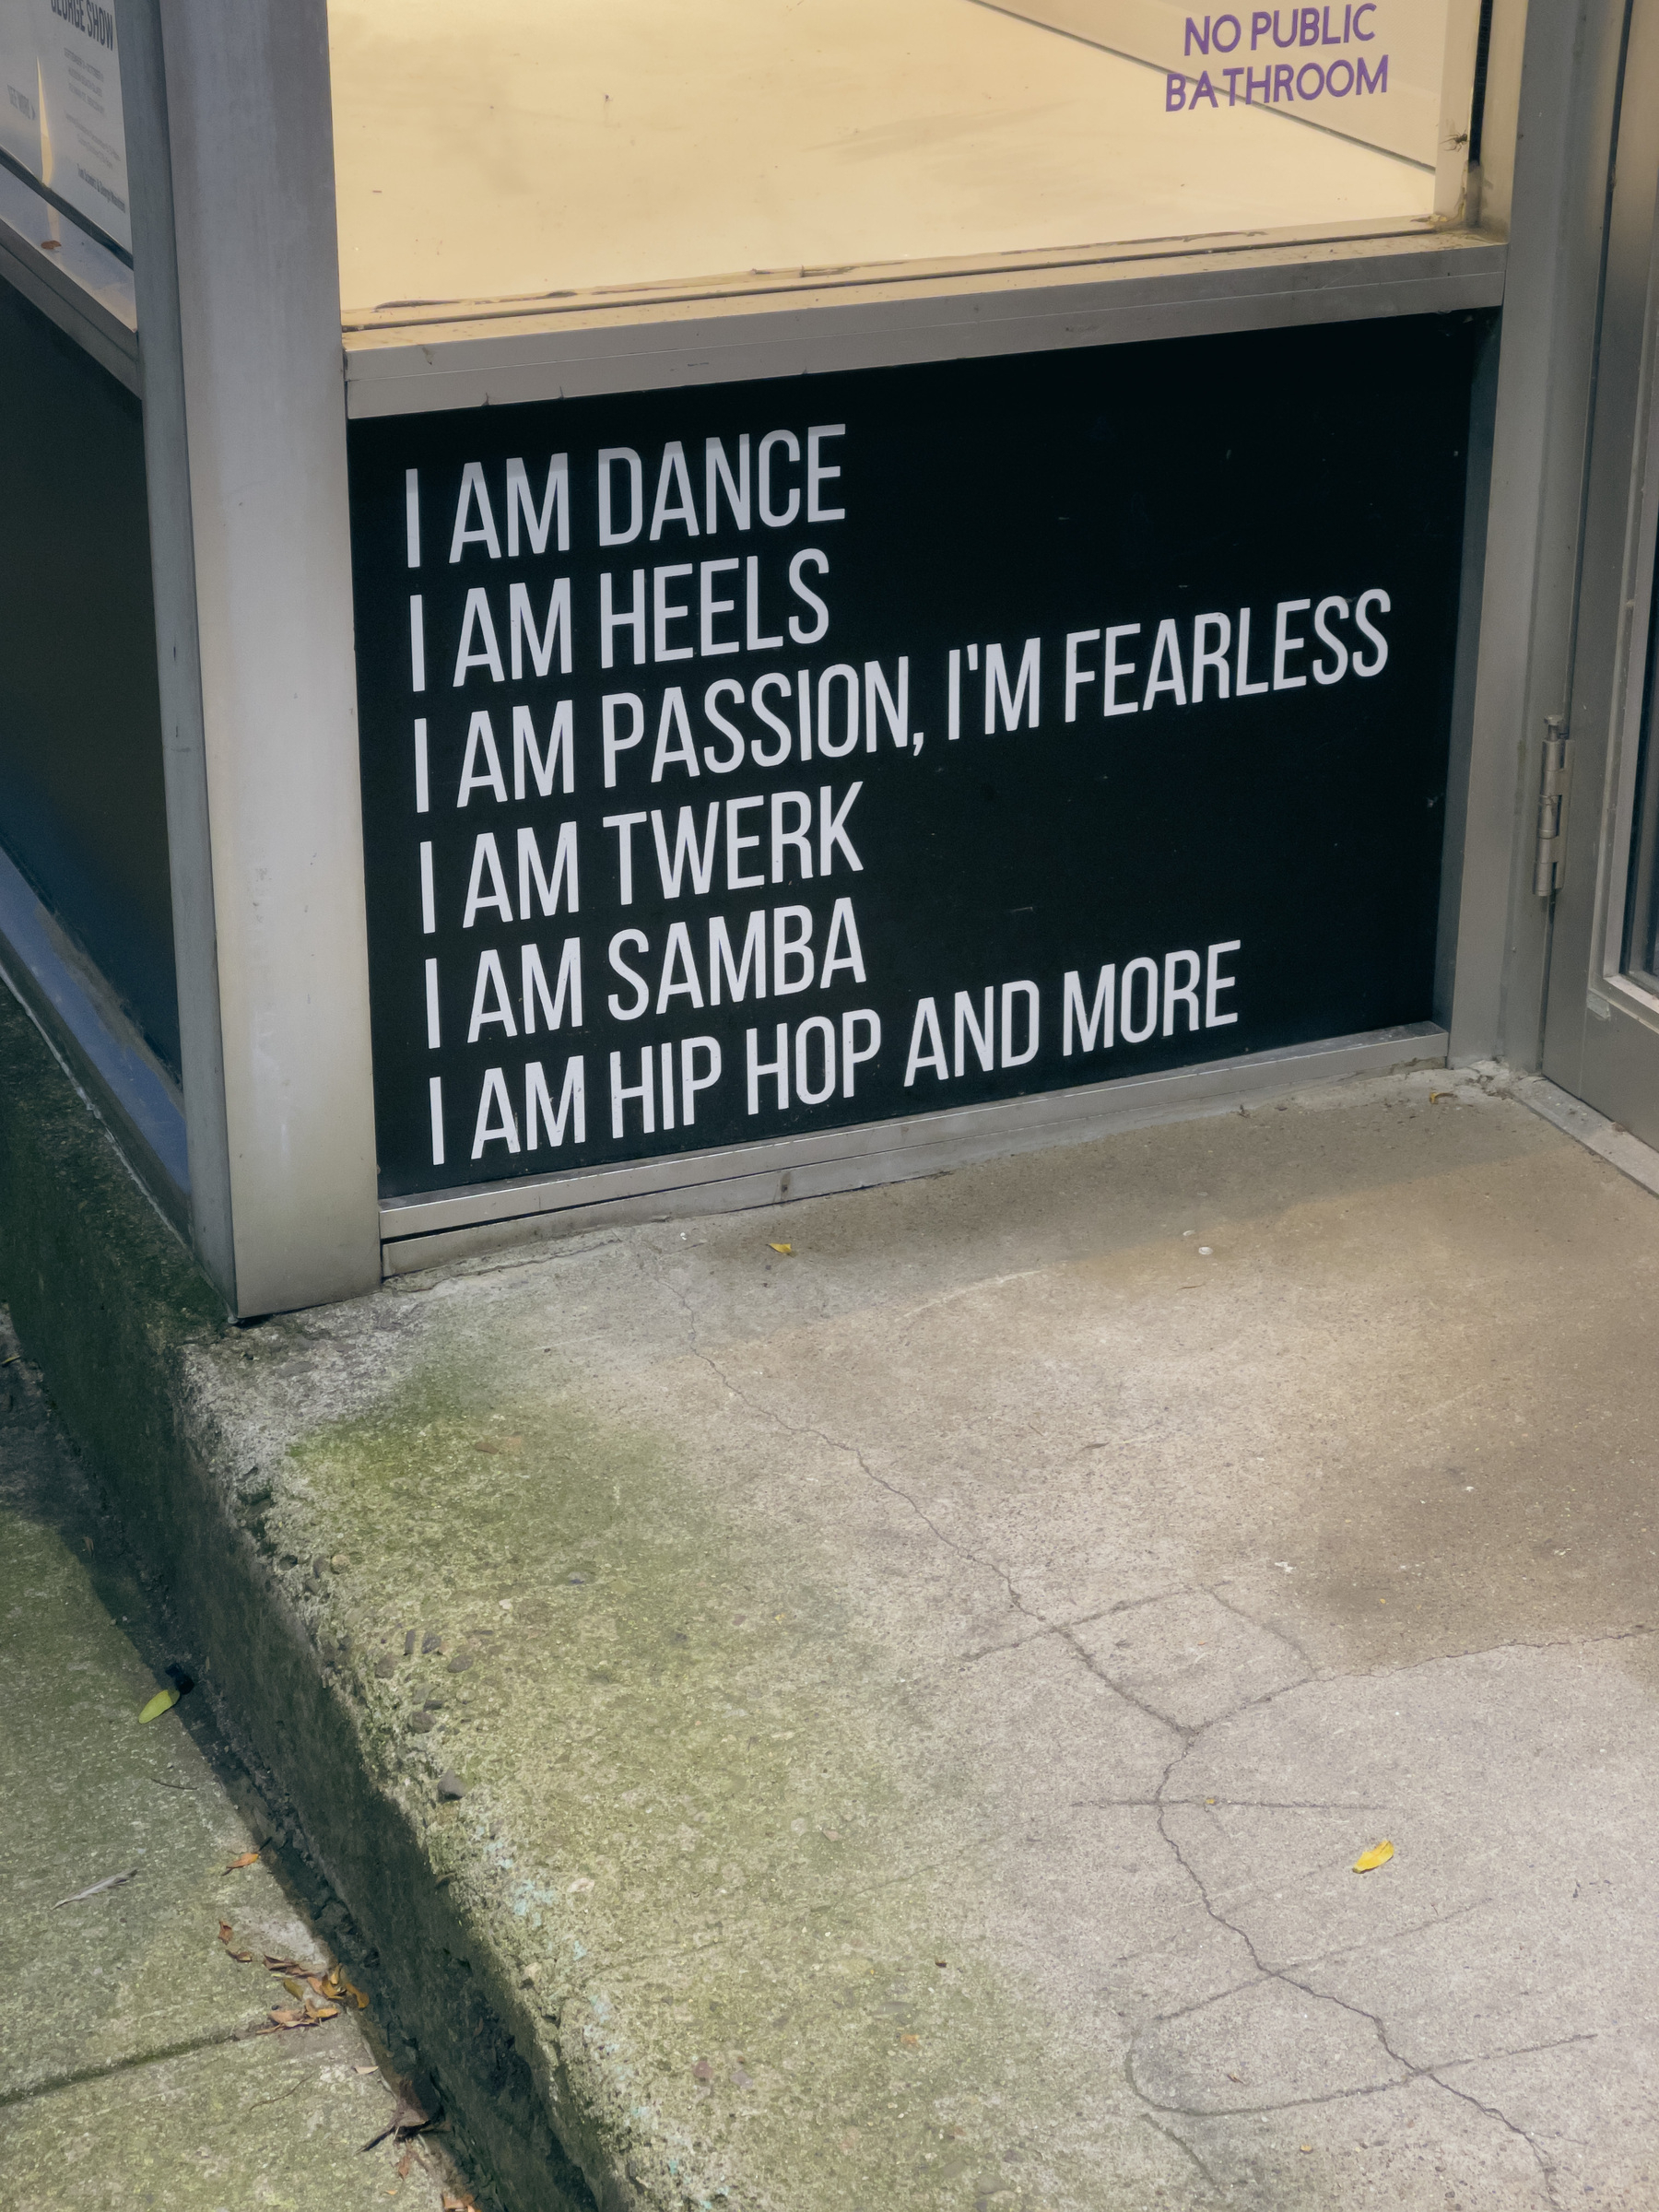 Sign at front entry to building saying I am dance, I am heels, I am passion, I’m fearless, I am twerk, I am samba, I am hip-hop and much more.